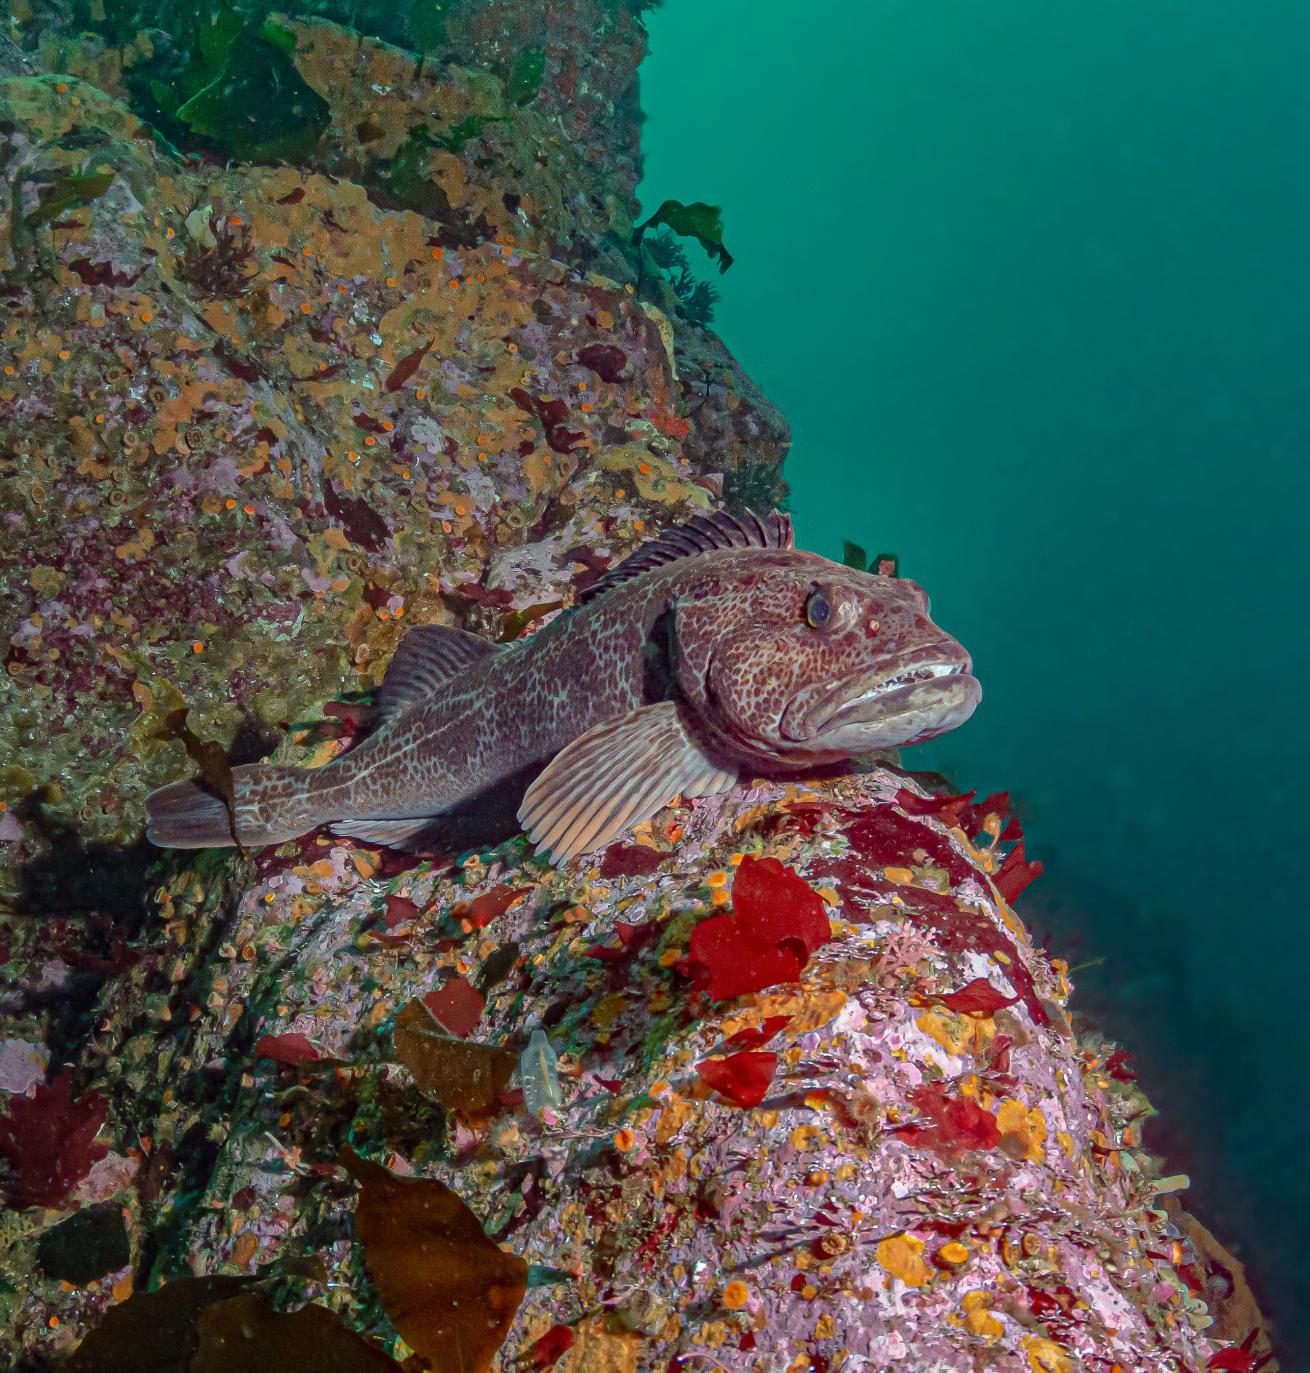 Inside the Point Lobos State Marine Conservation Area California, a ling cod reclines on a pinnacle.